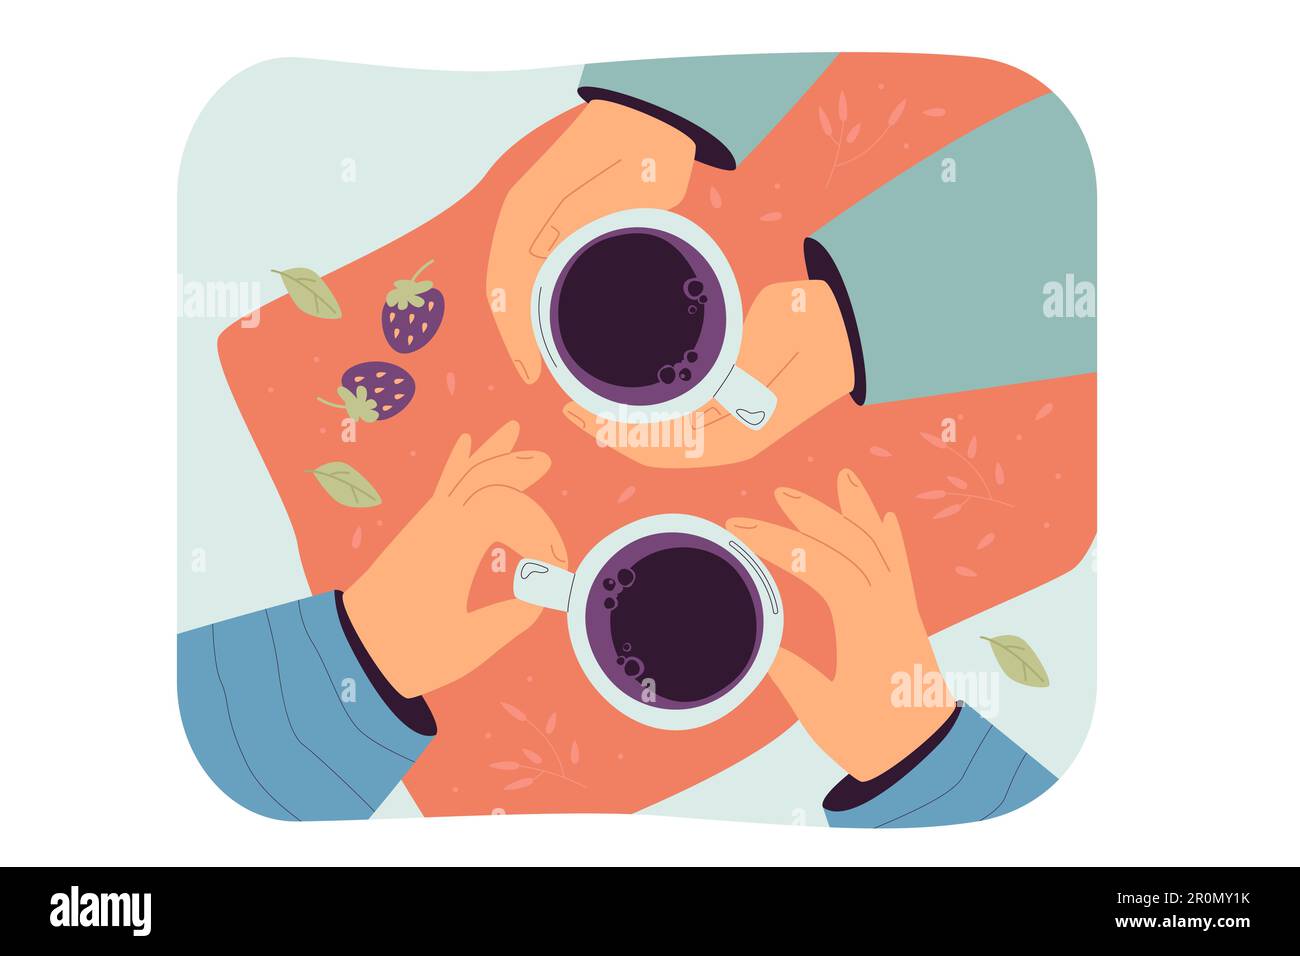 Top view of human hands holding cups Stock Vector